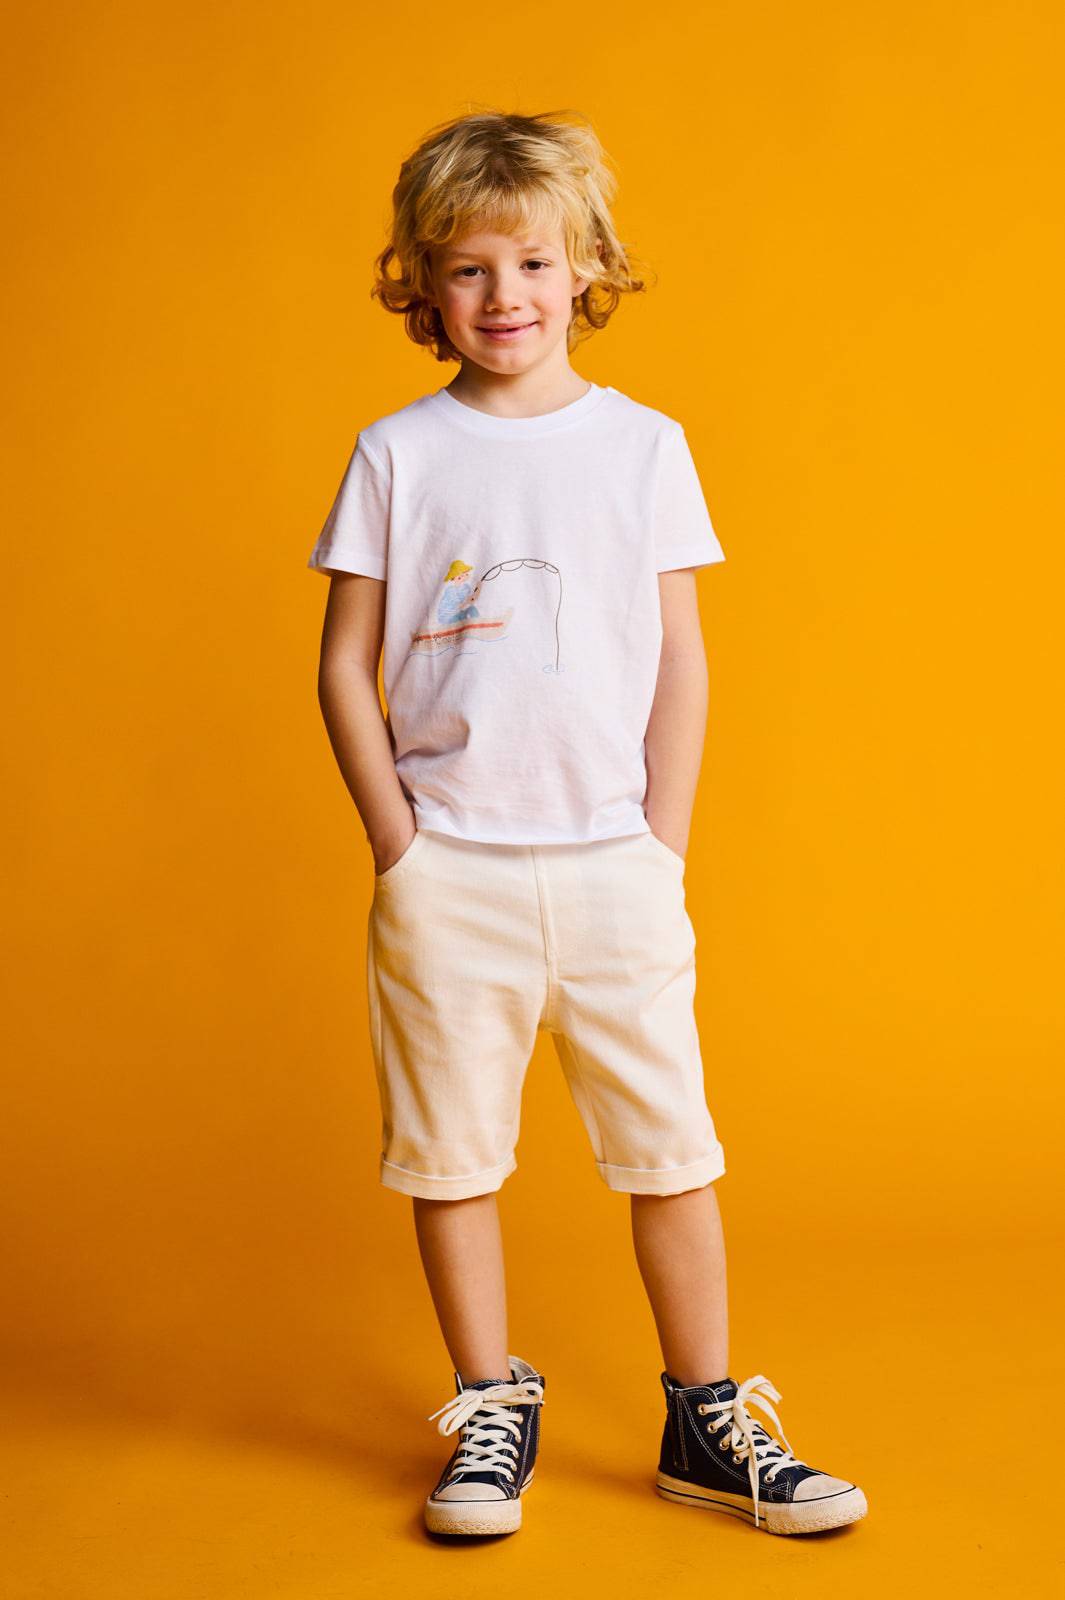 The Fisherman T-Shirt (boys) - CooCootales